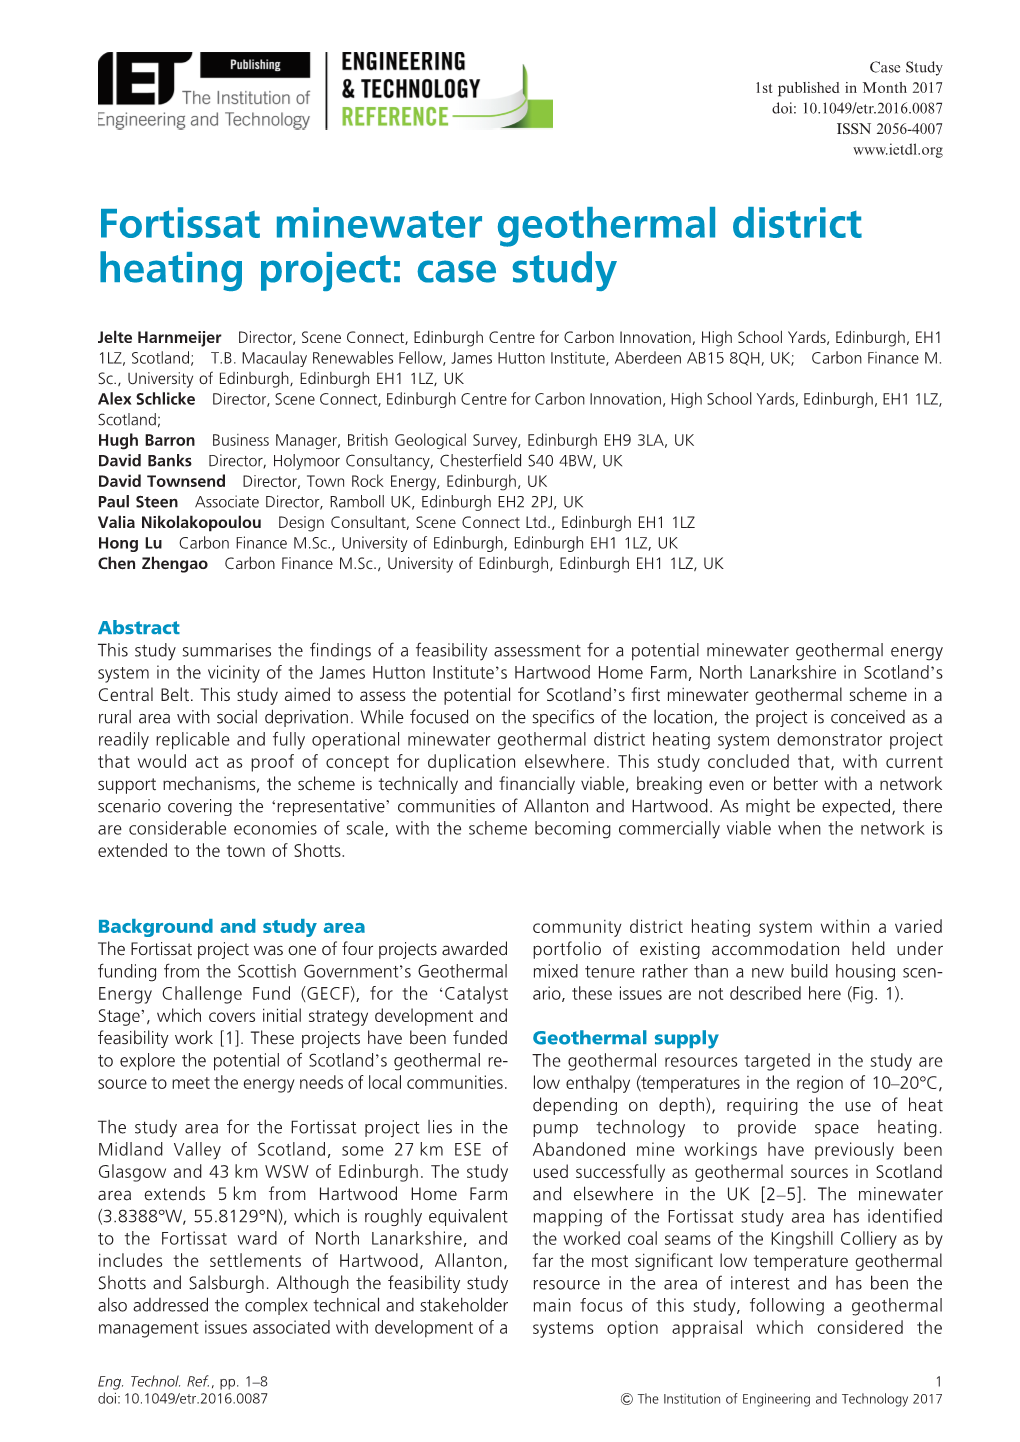 Fortissat Minewater Geothermal District Heating Project: Case Study